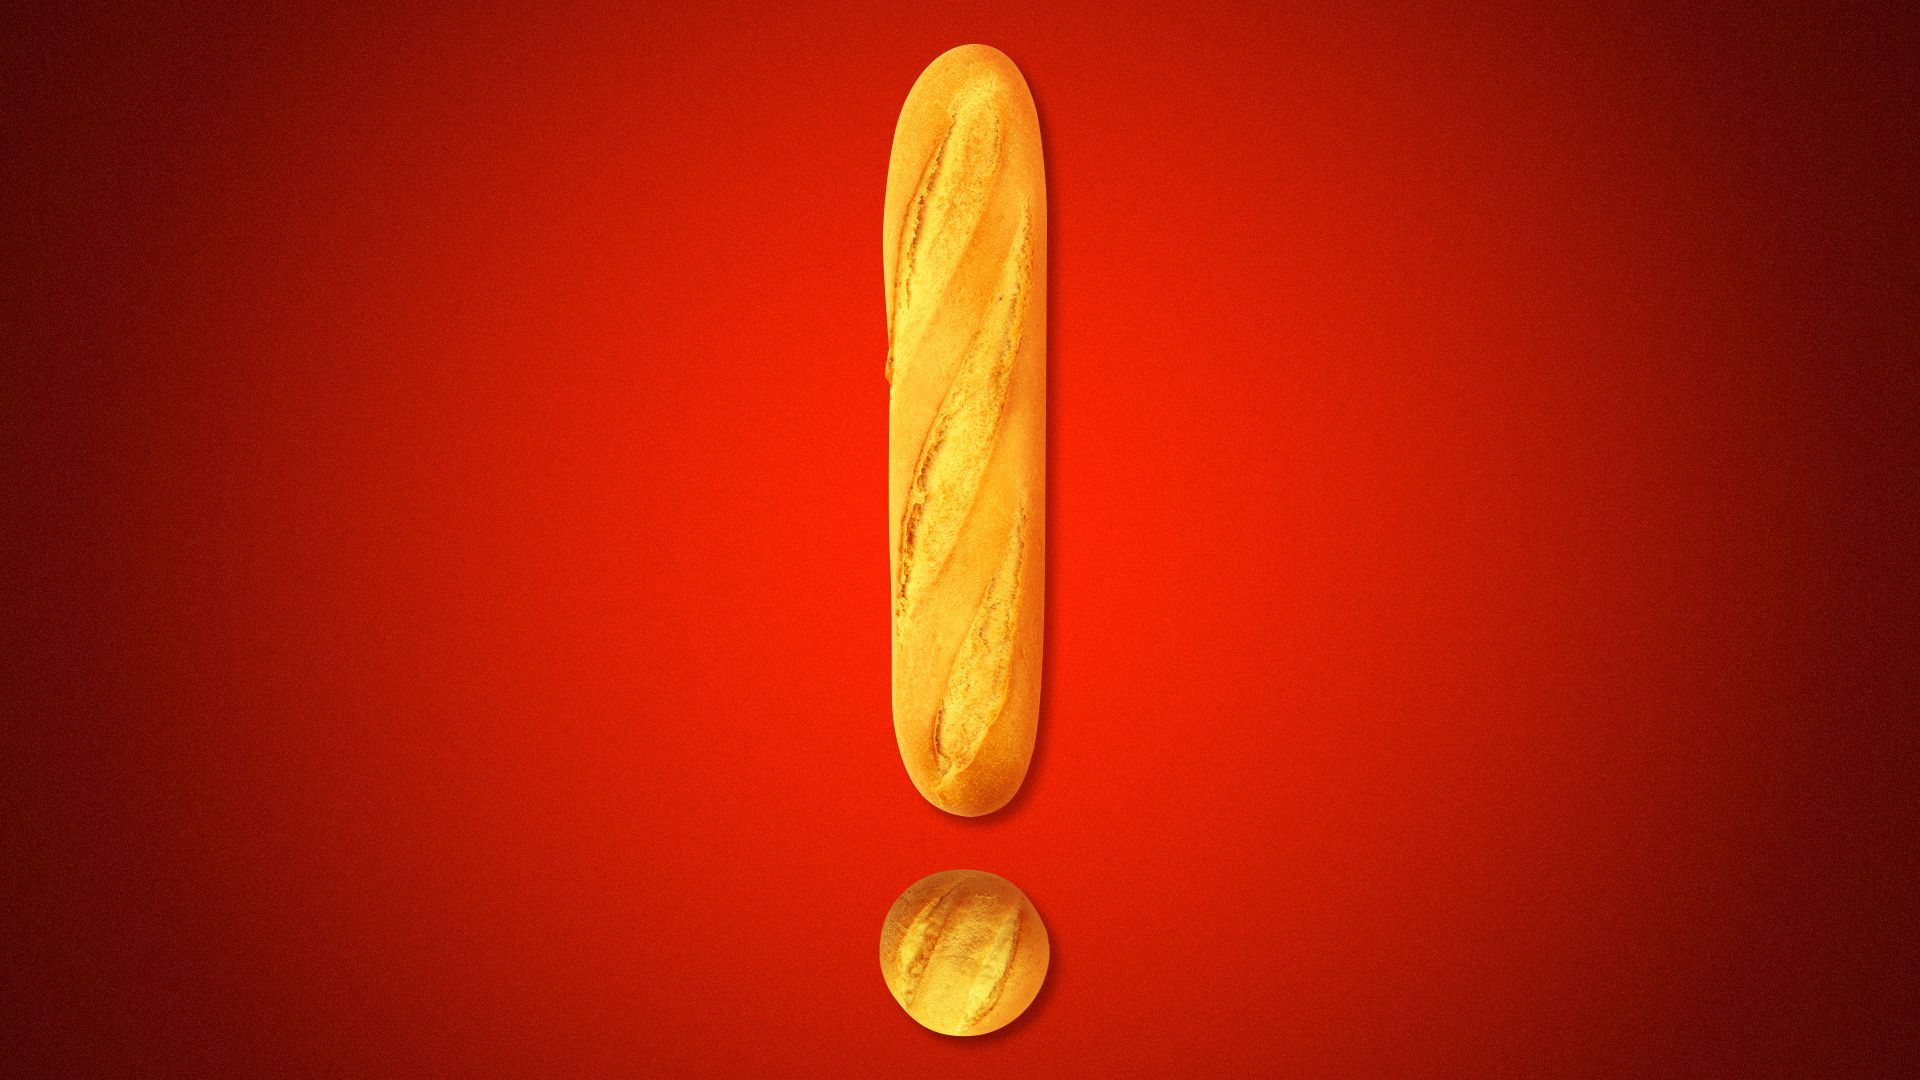 Illustration of an exclamation point made out of a baguette and a dinner roll. 